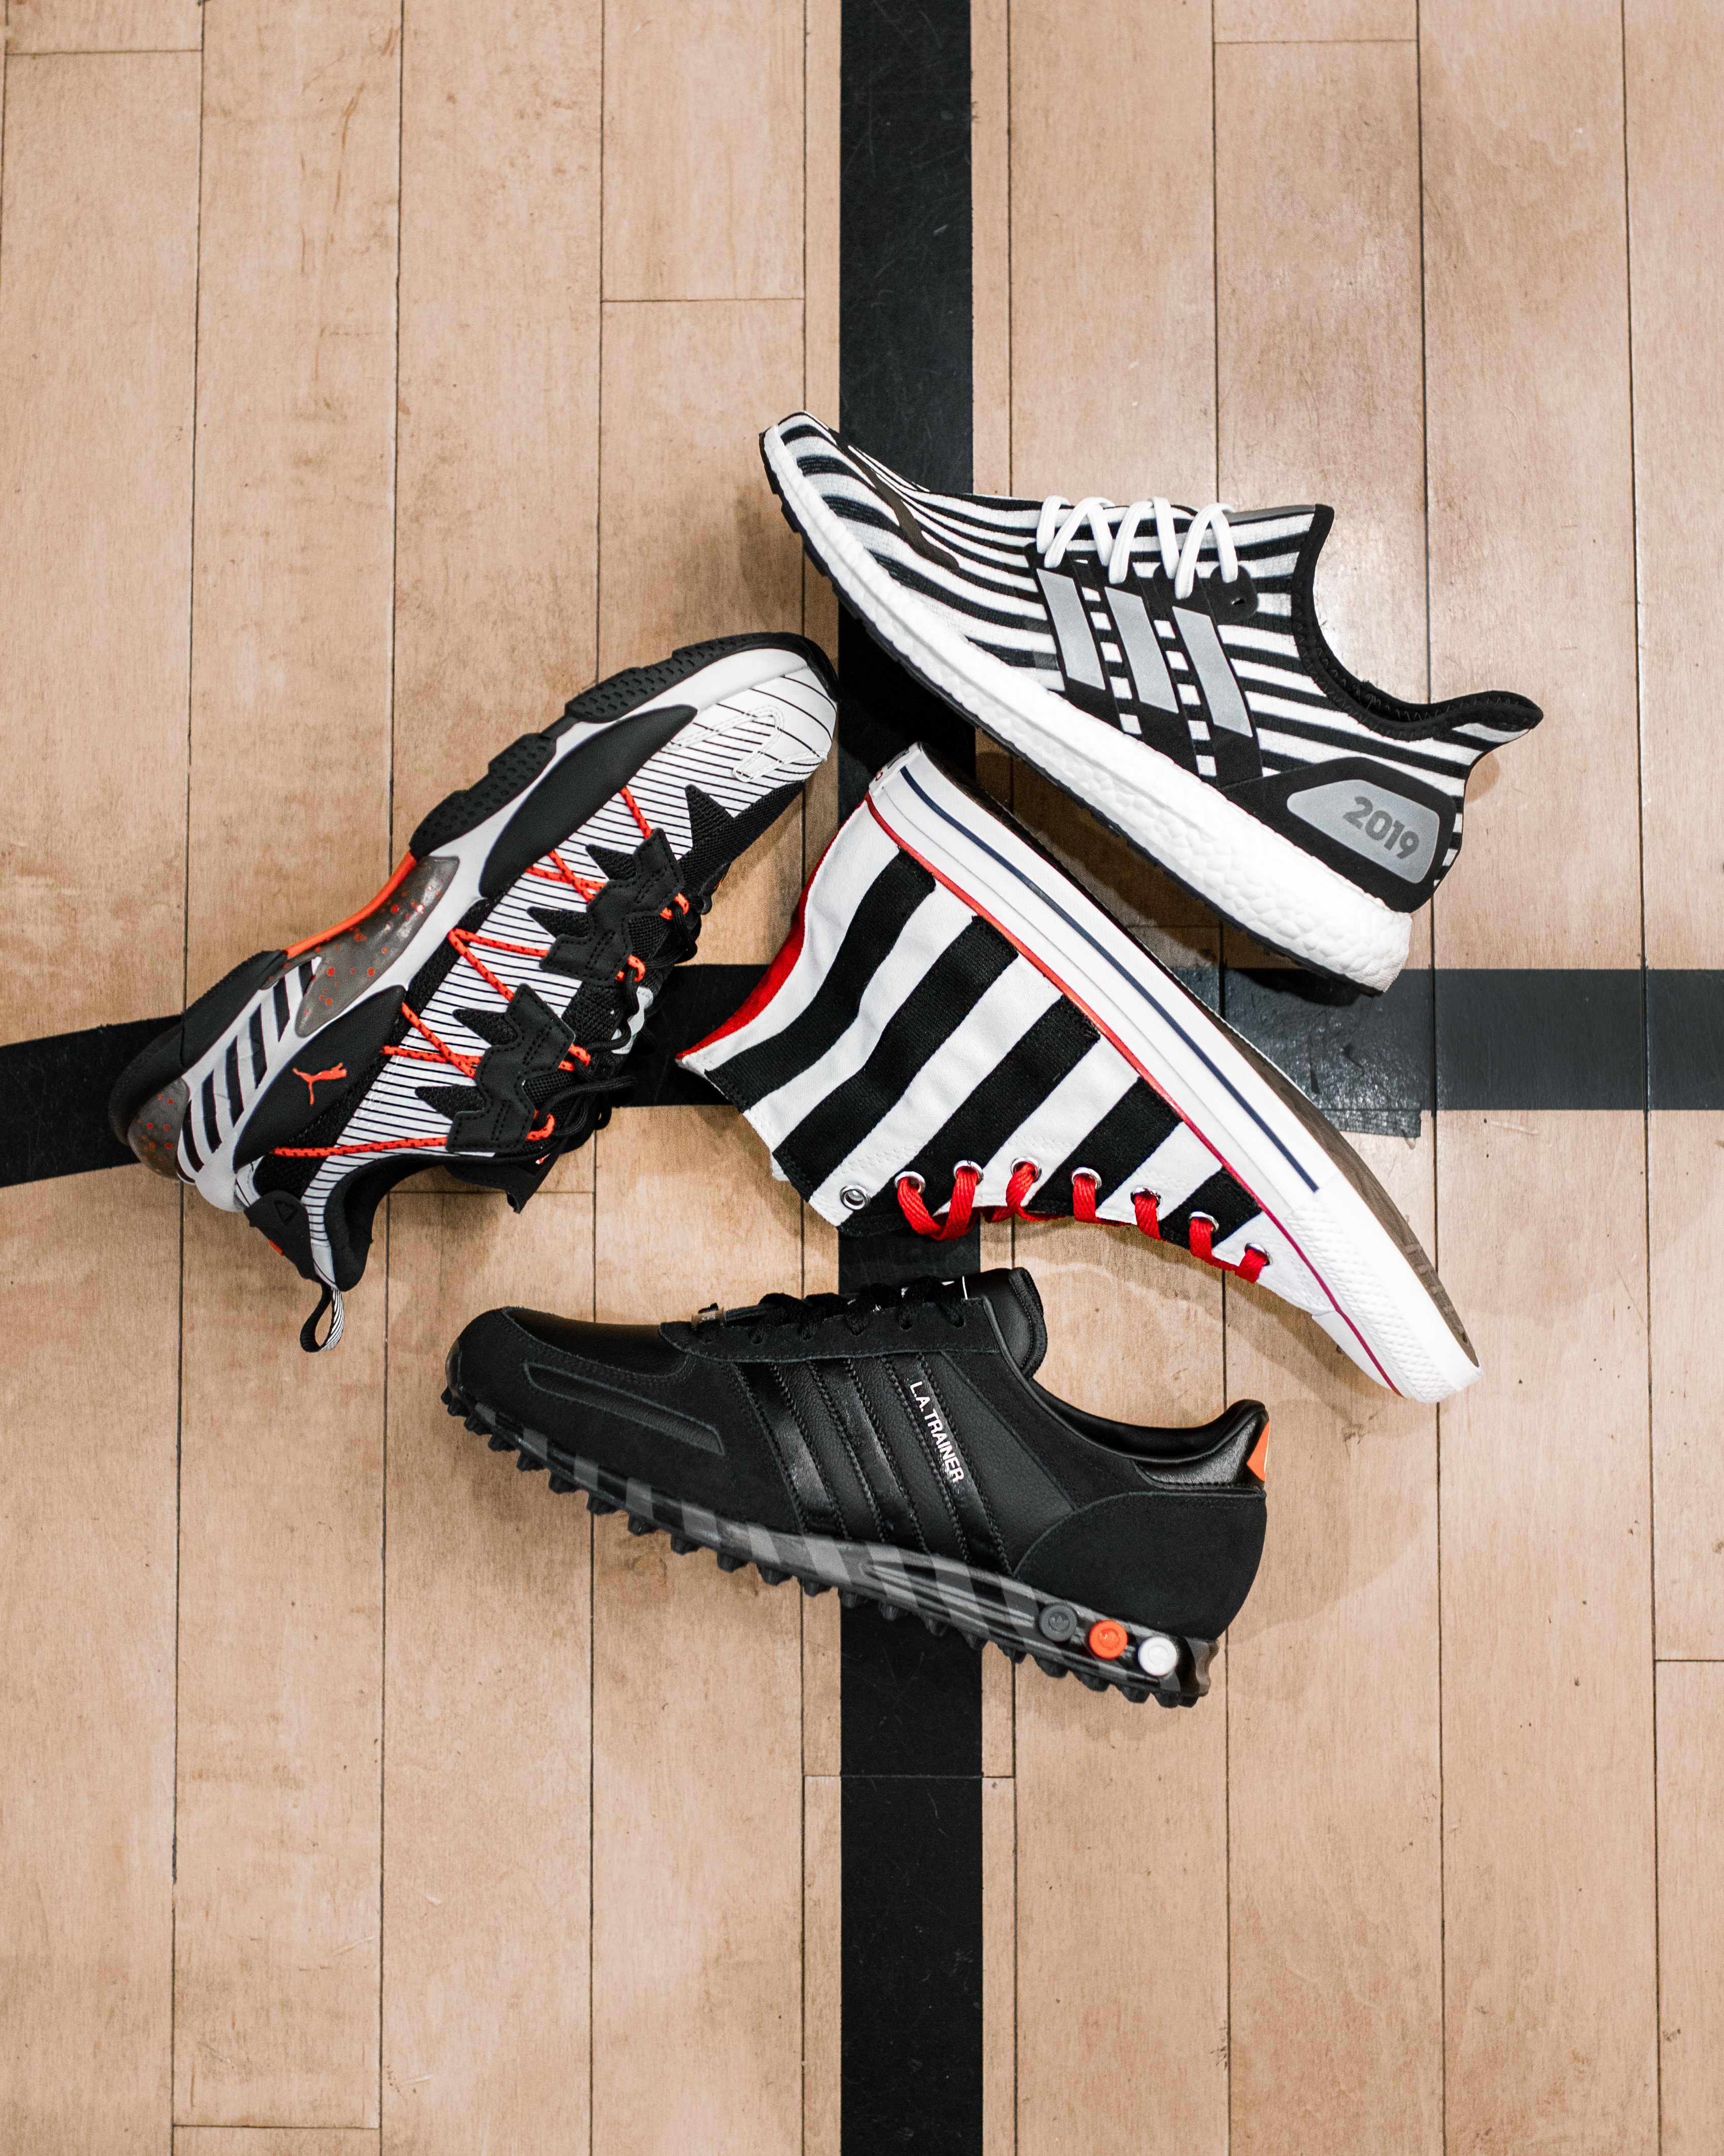 Foot Locker Gets Back To Center Of Sneaker Culture By Focusing On